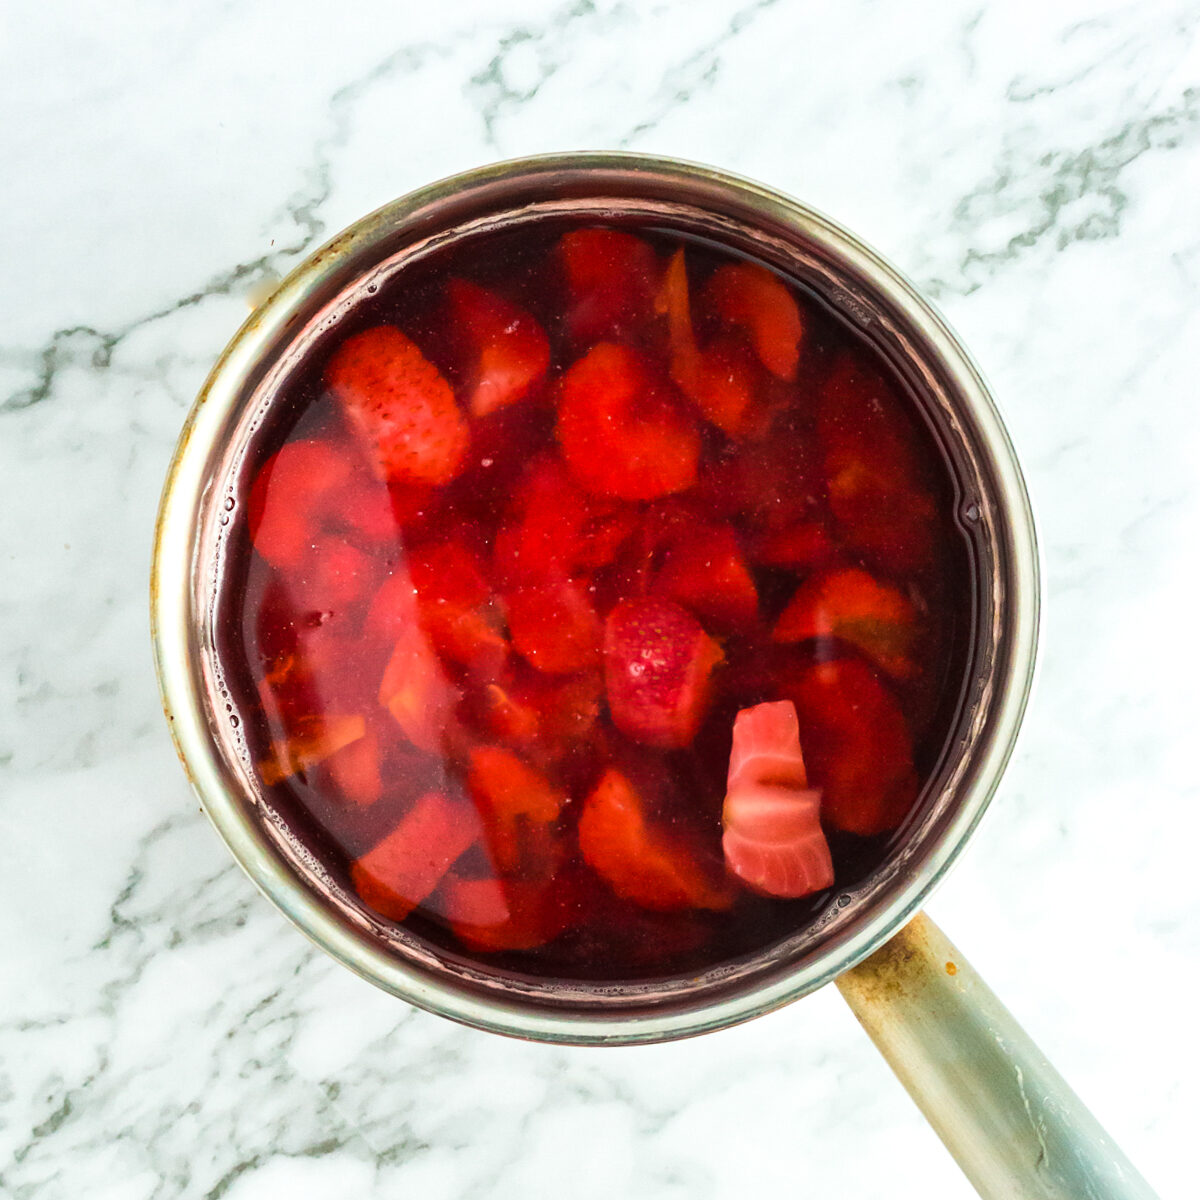 Sliced strawberries and peaches have been added to the simple syrup in the saucepan.